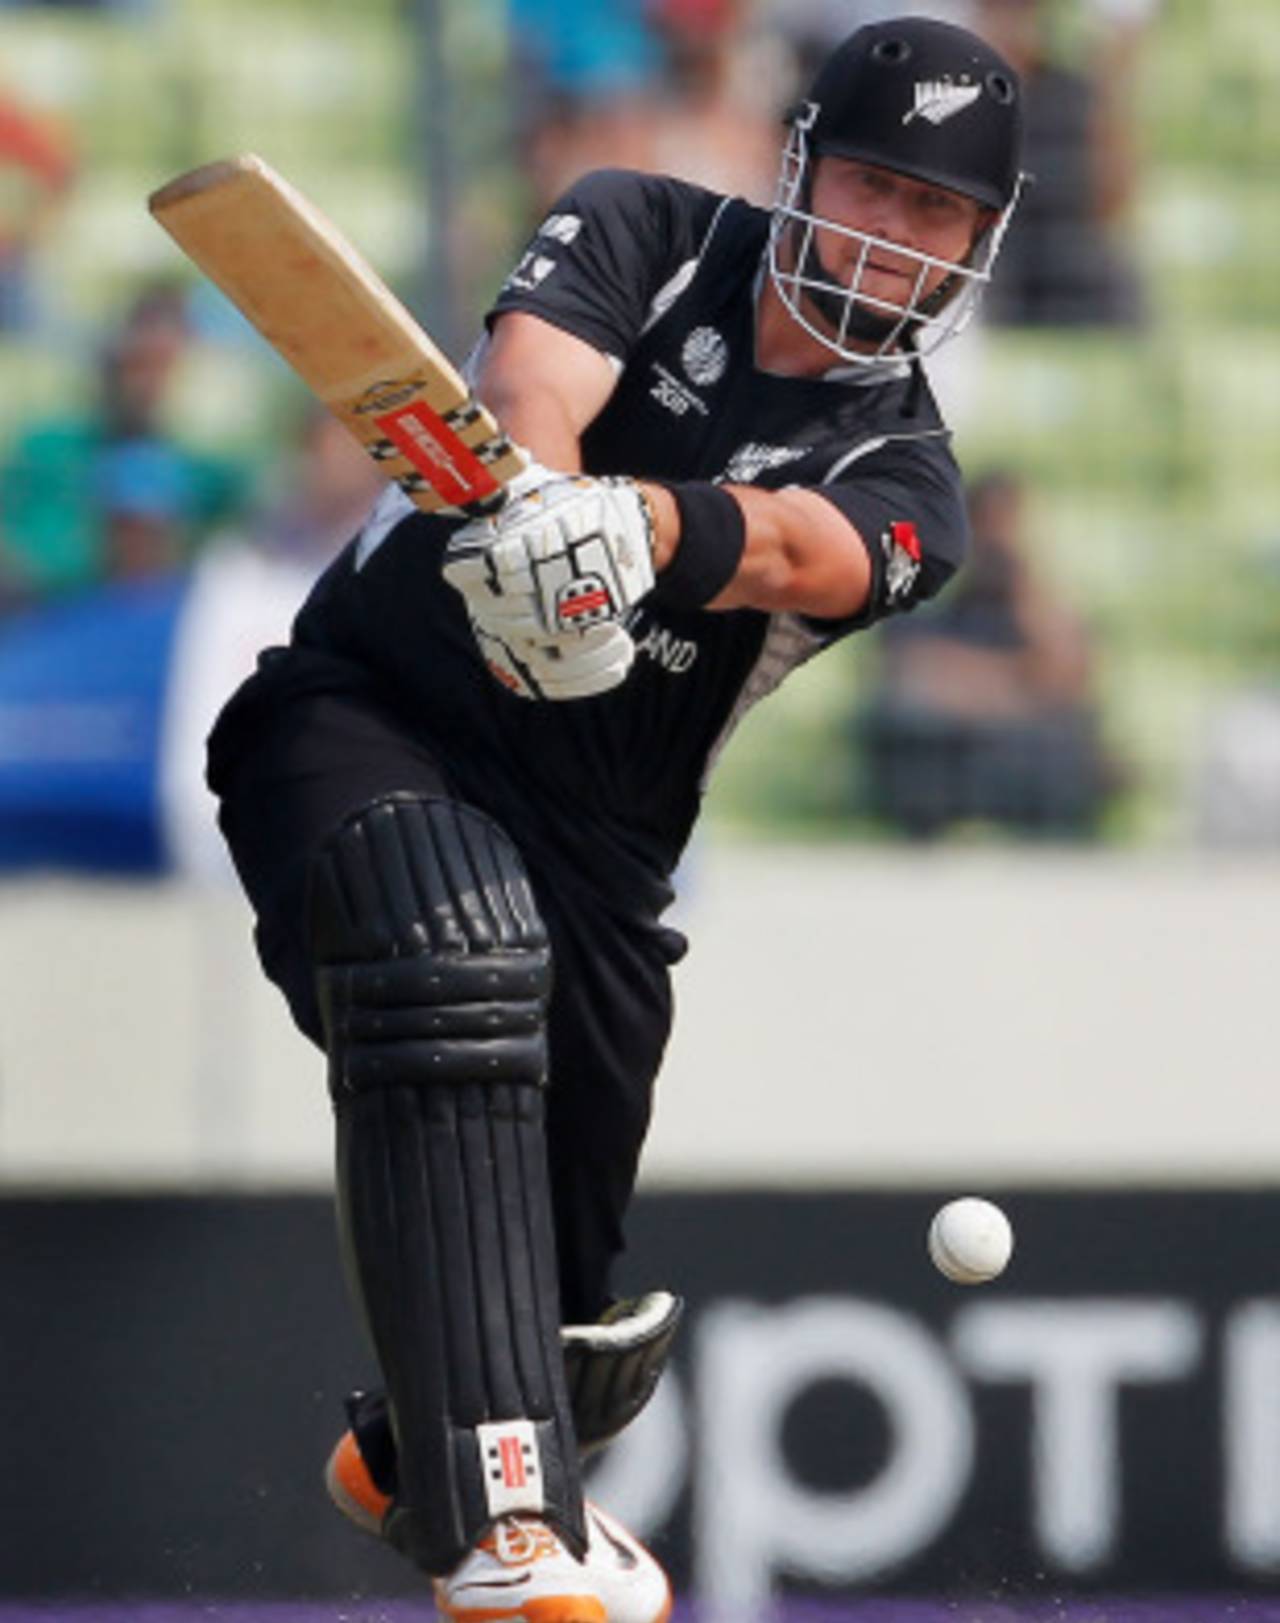 Jesse Ryder hits down the ground, New Zealand v South Africa, 3rd quarter-final, Mirpur, World Cup 2011, March 25, 2011